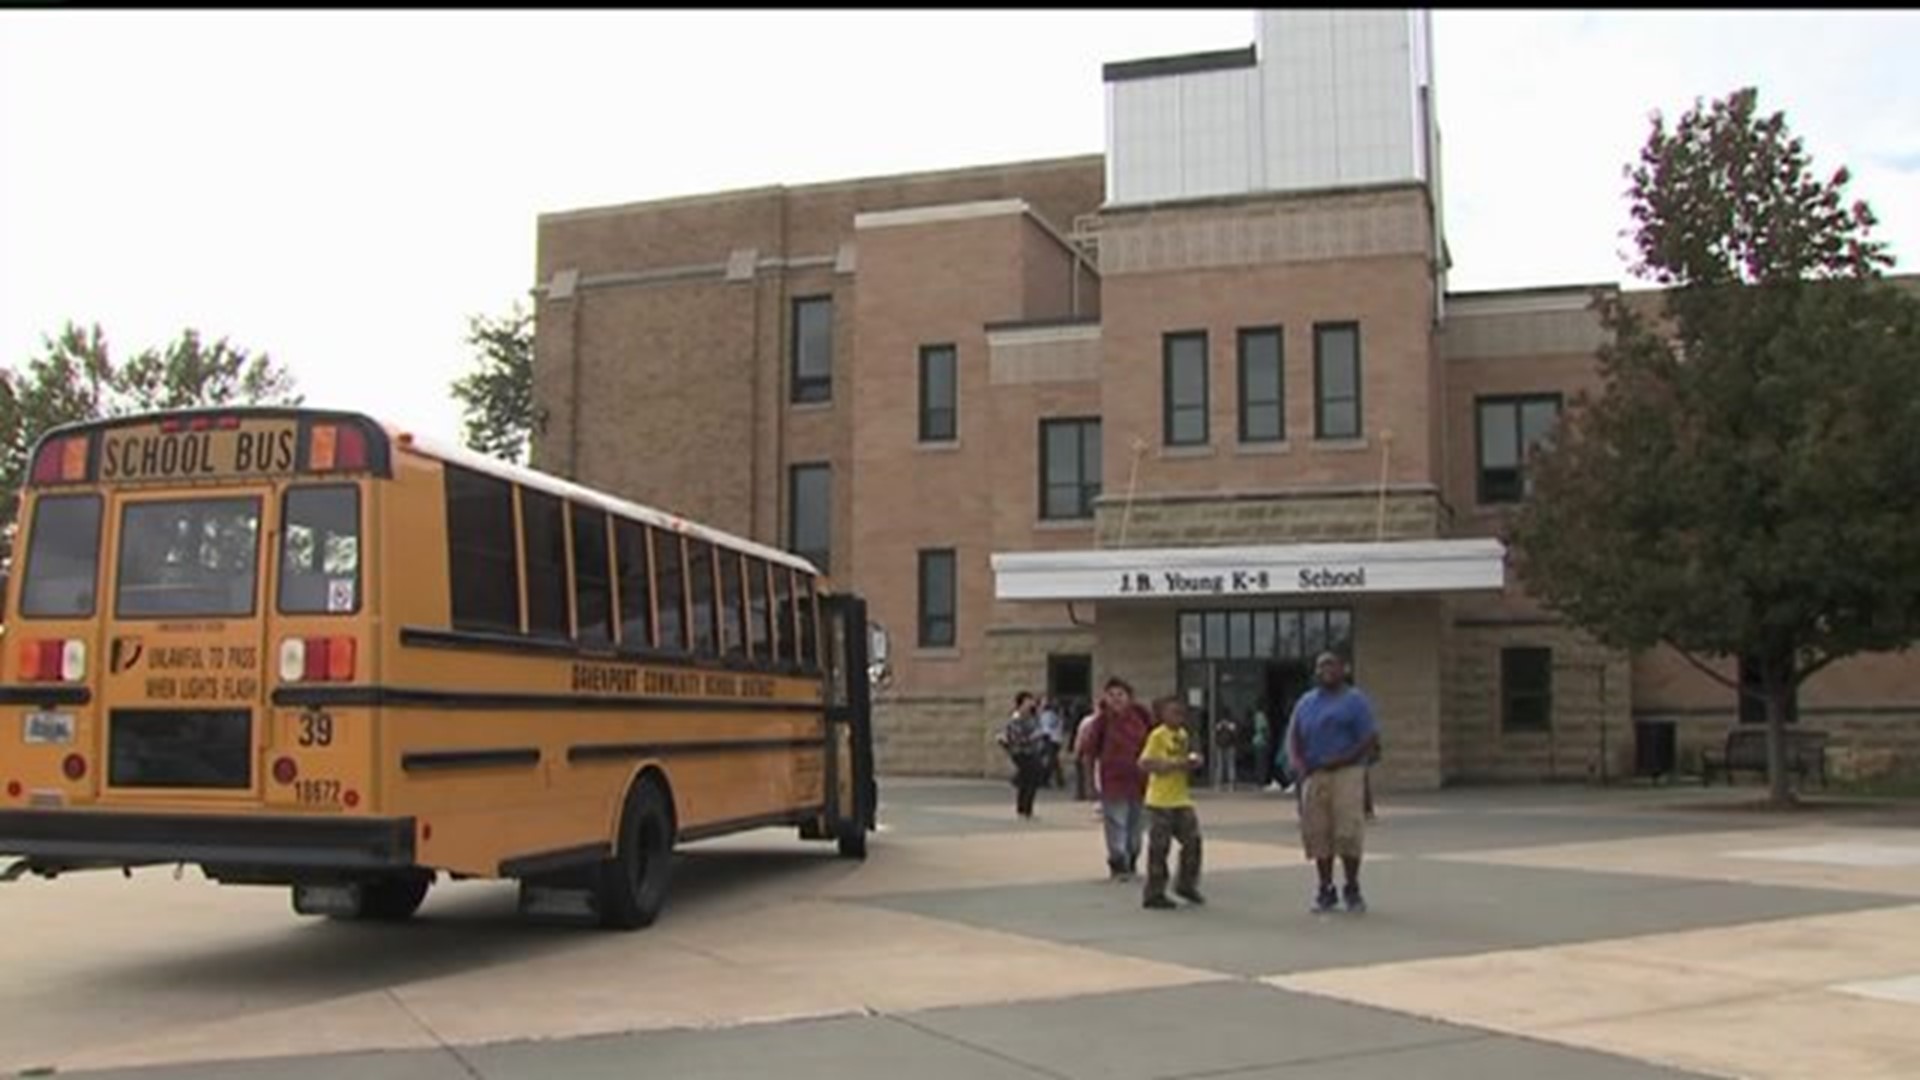 Options for JB Young School discussed